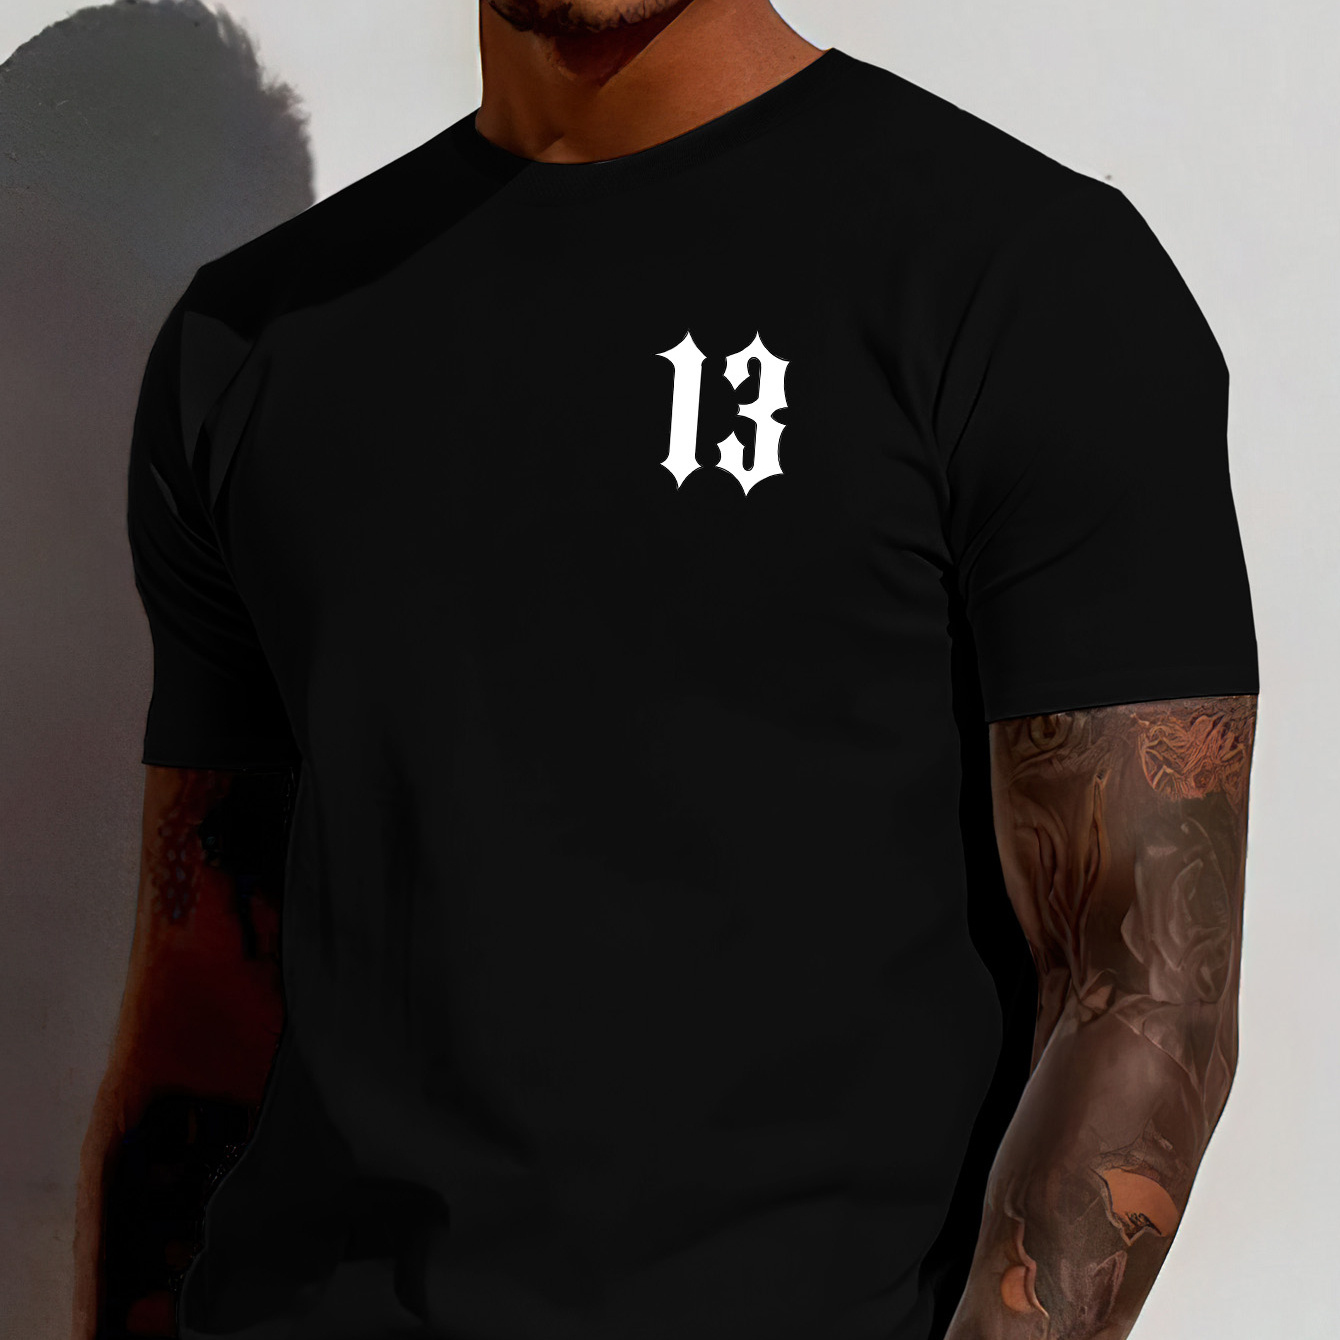 

Number 13 "creative Print Men's Casual T-shirt, Summer Fashion Crew Neck Short Sleeve Top, Modern Streetwear Style For Men